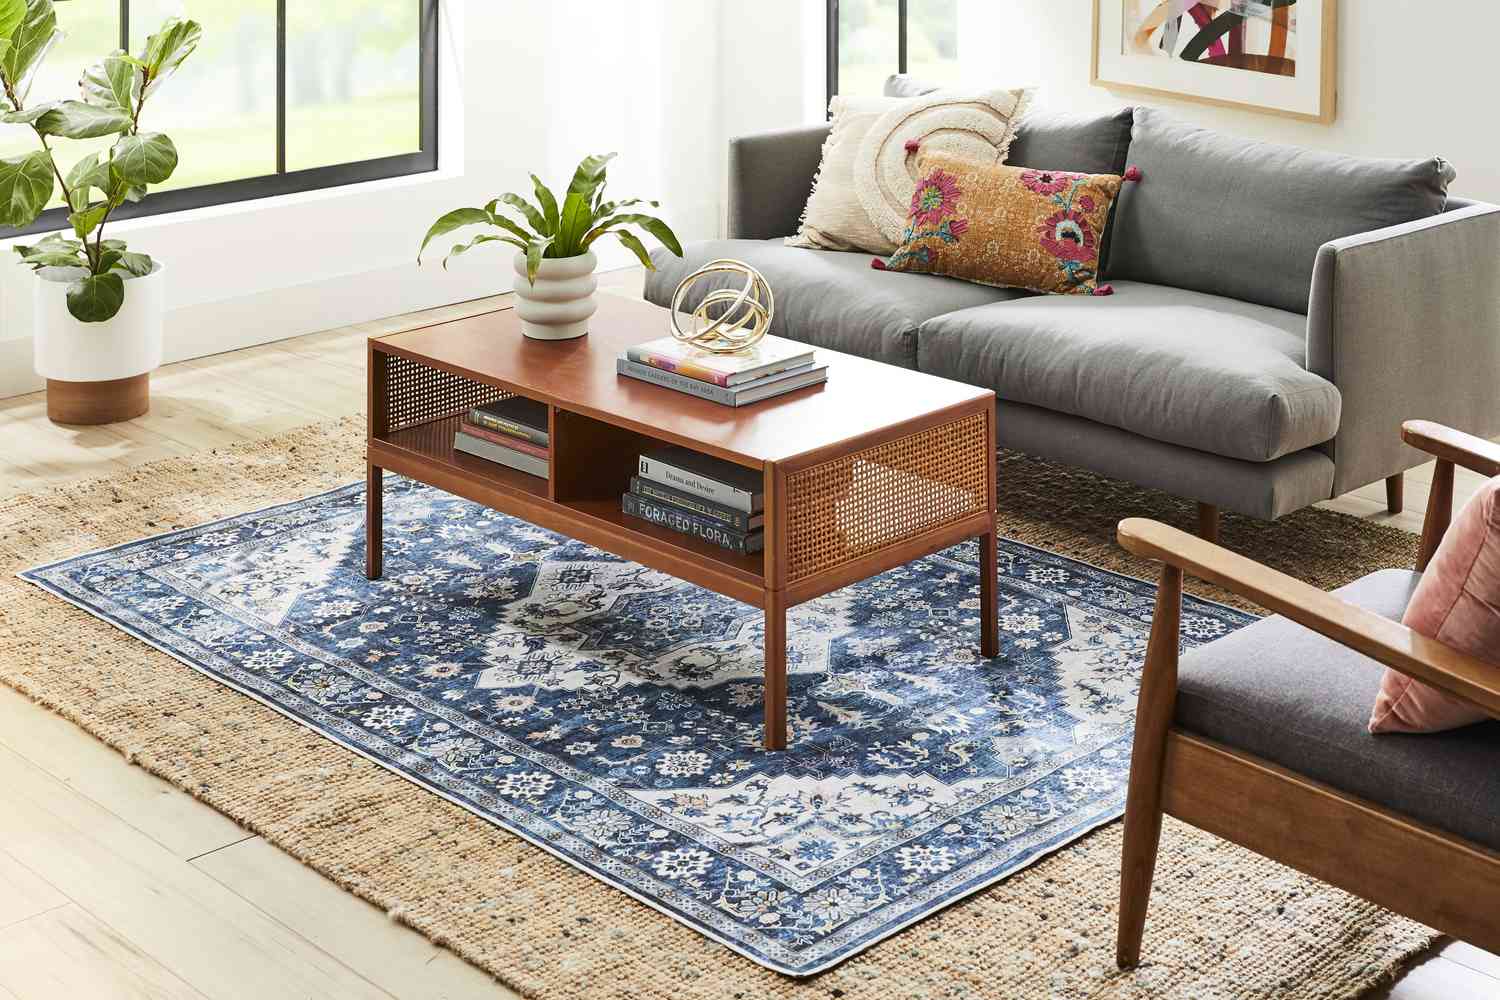 How To Decorate With A Patterned Rug